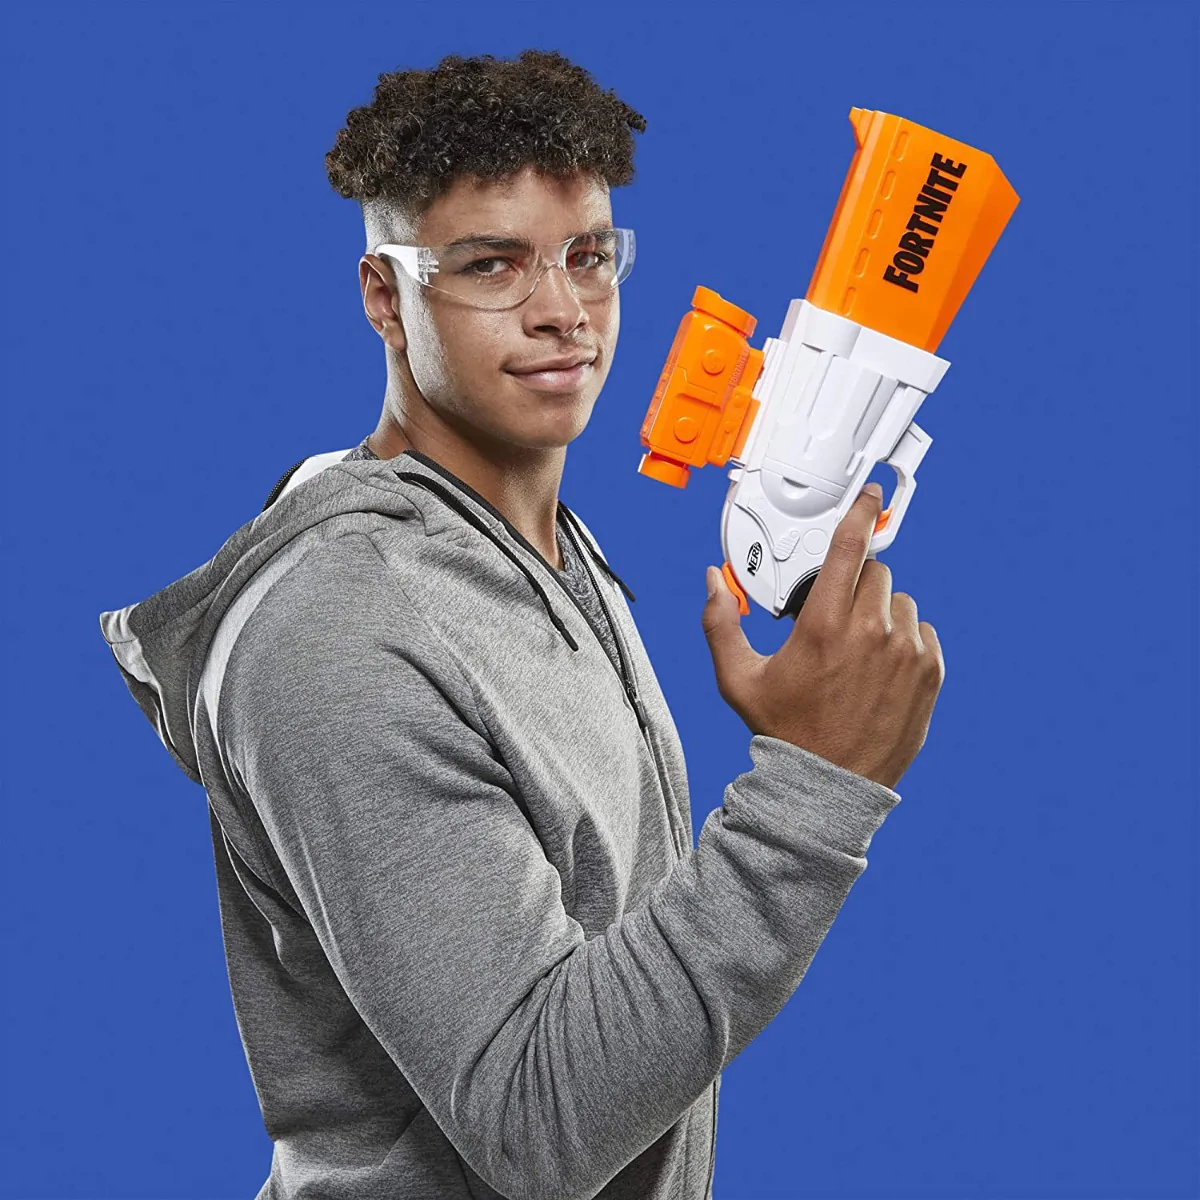 nerf_fortnite_sr_blaster_4-dart_hammer_action_includes_removable_scope_and_8_elite_darts_for_youth_teens_adults_6